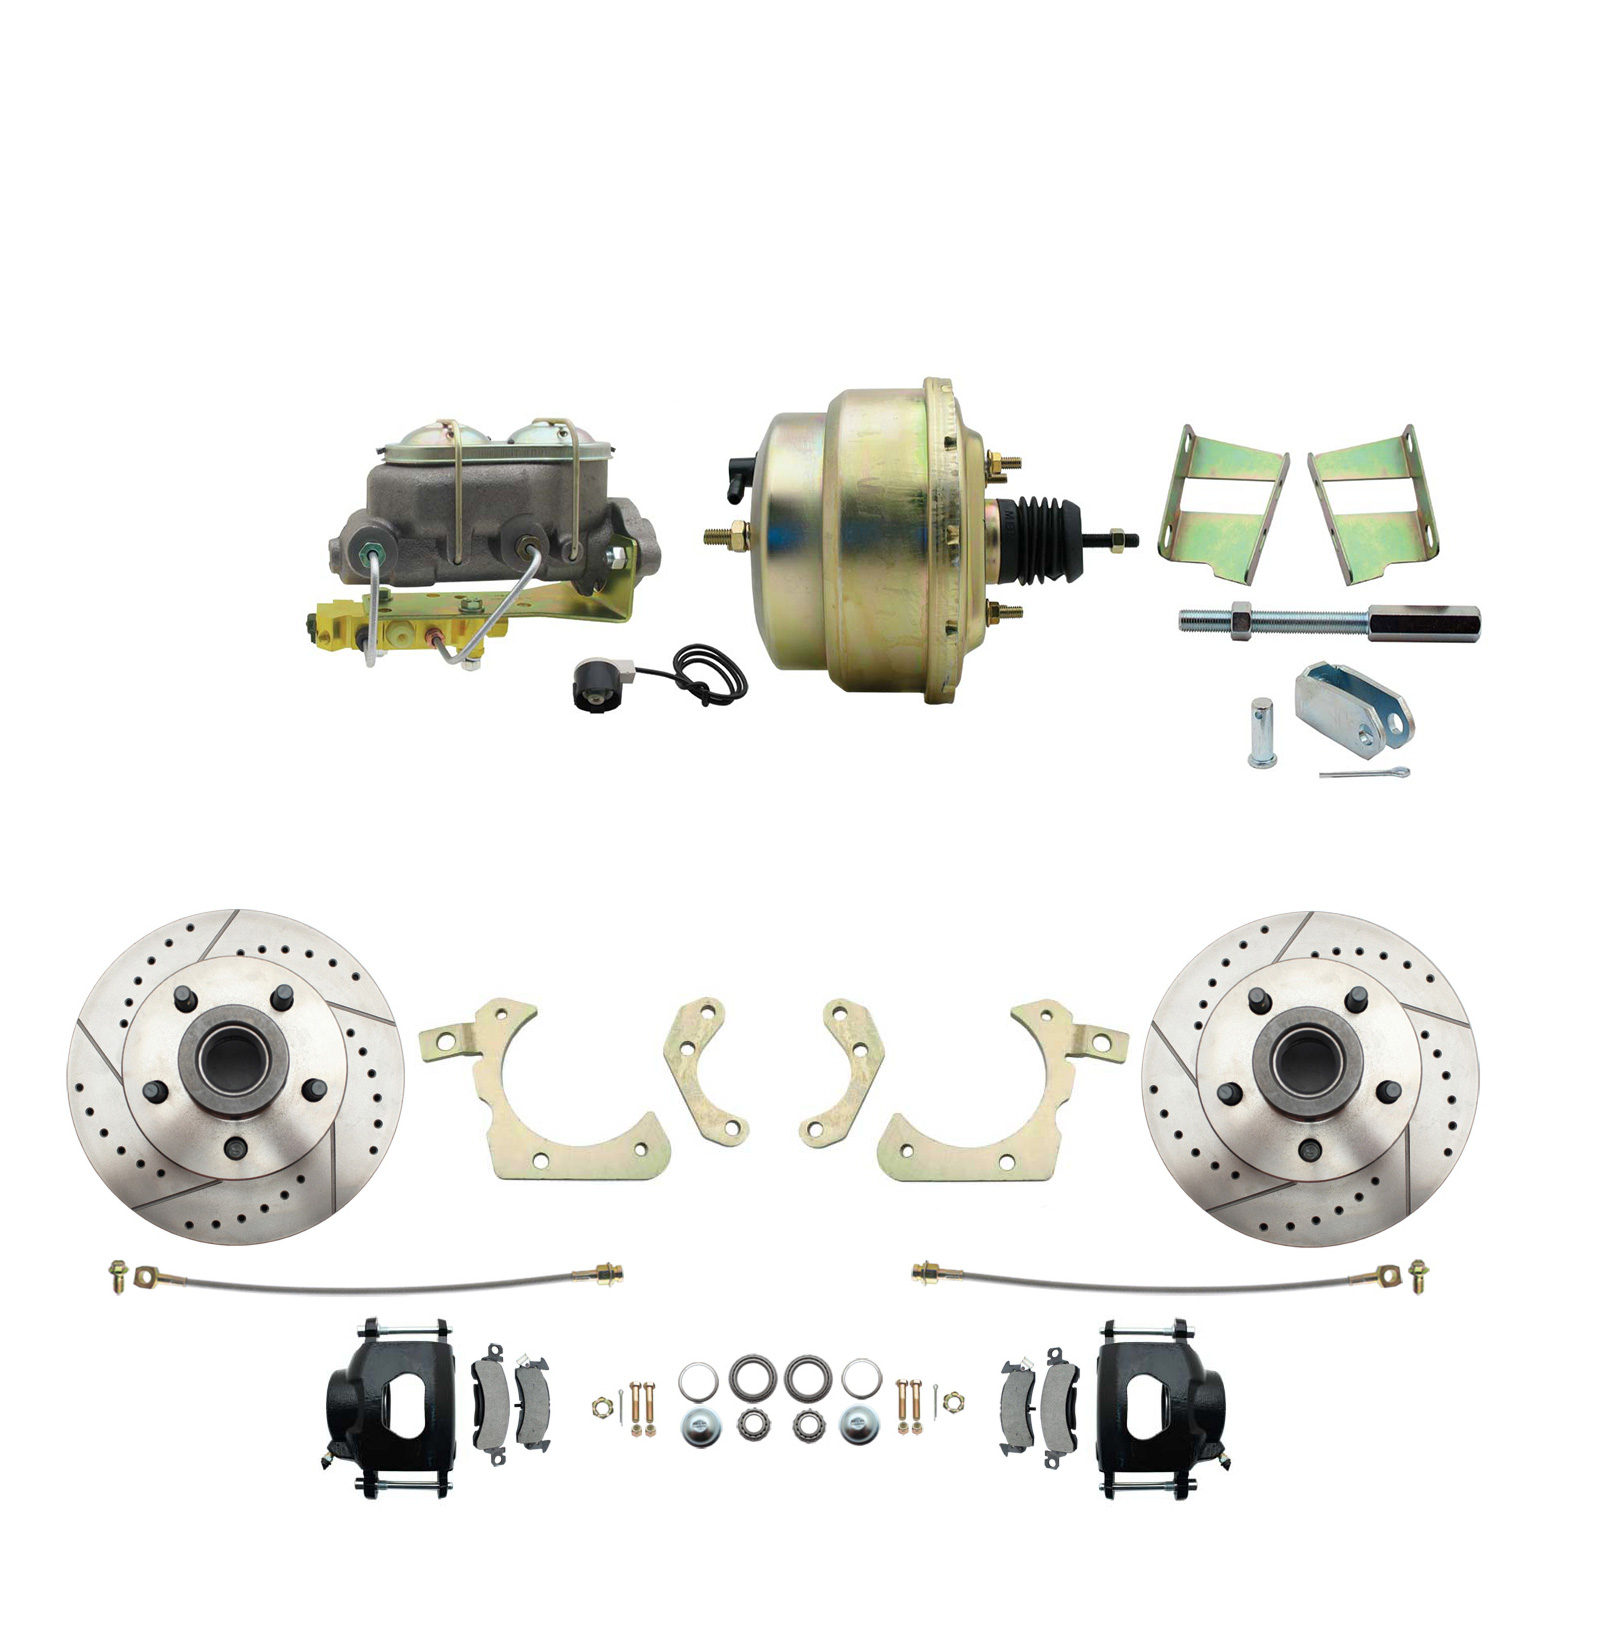 1959-1964 GM Full Size Front Disc Brake Kit Black Powder Coated Calipers Drilled/Slotted Rotors (Impala, Bel Air, Biscayne) & 8 Dual Zinc Booster Conversion Kit W/ Cast Iron Master Cylinder Bottom Mount Disc/ Drum Proportioni